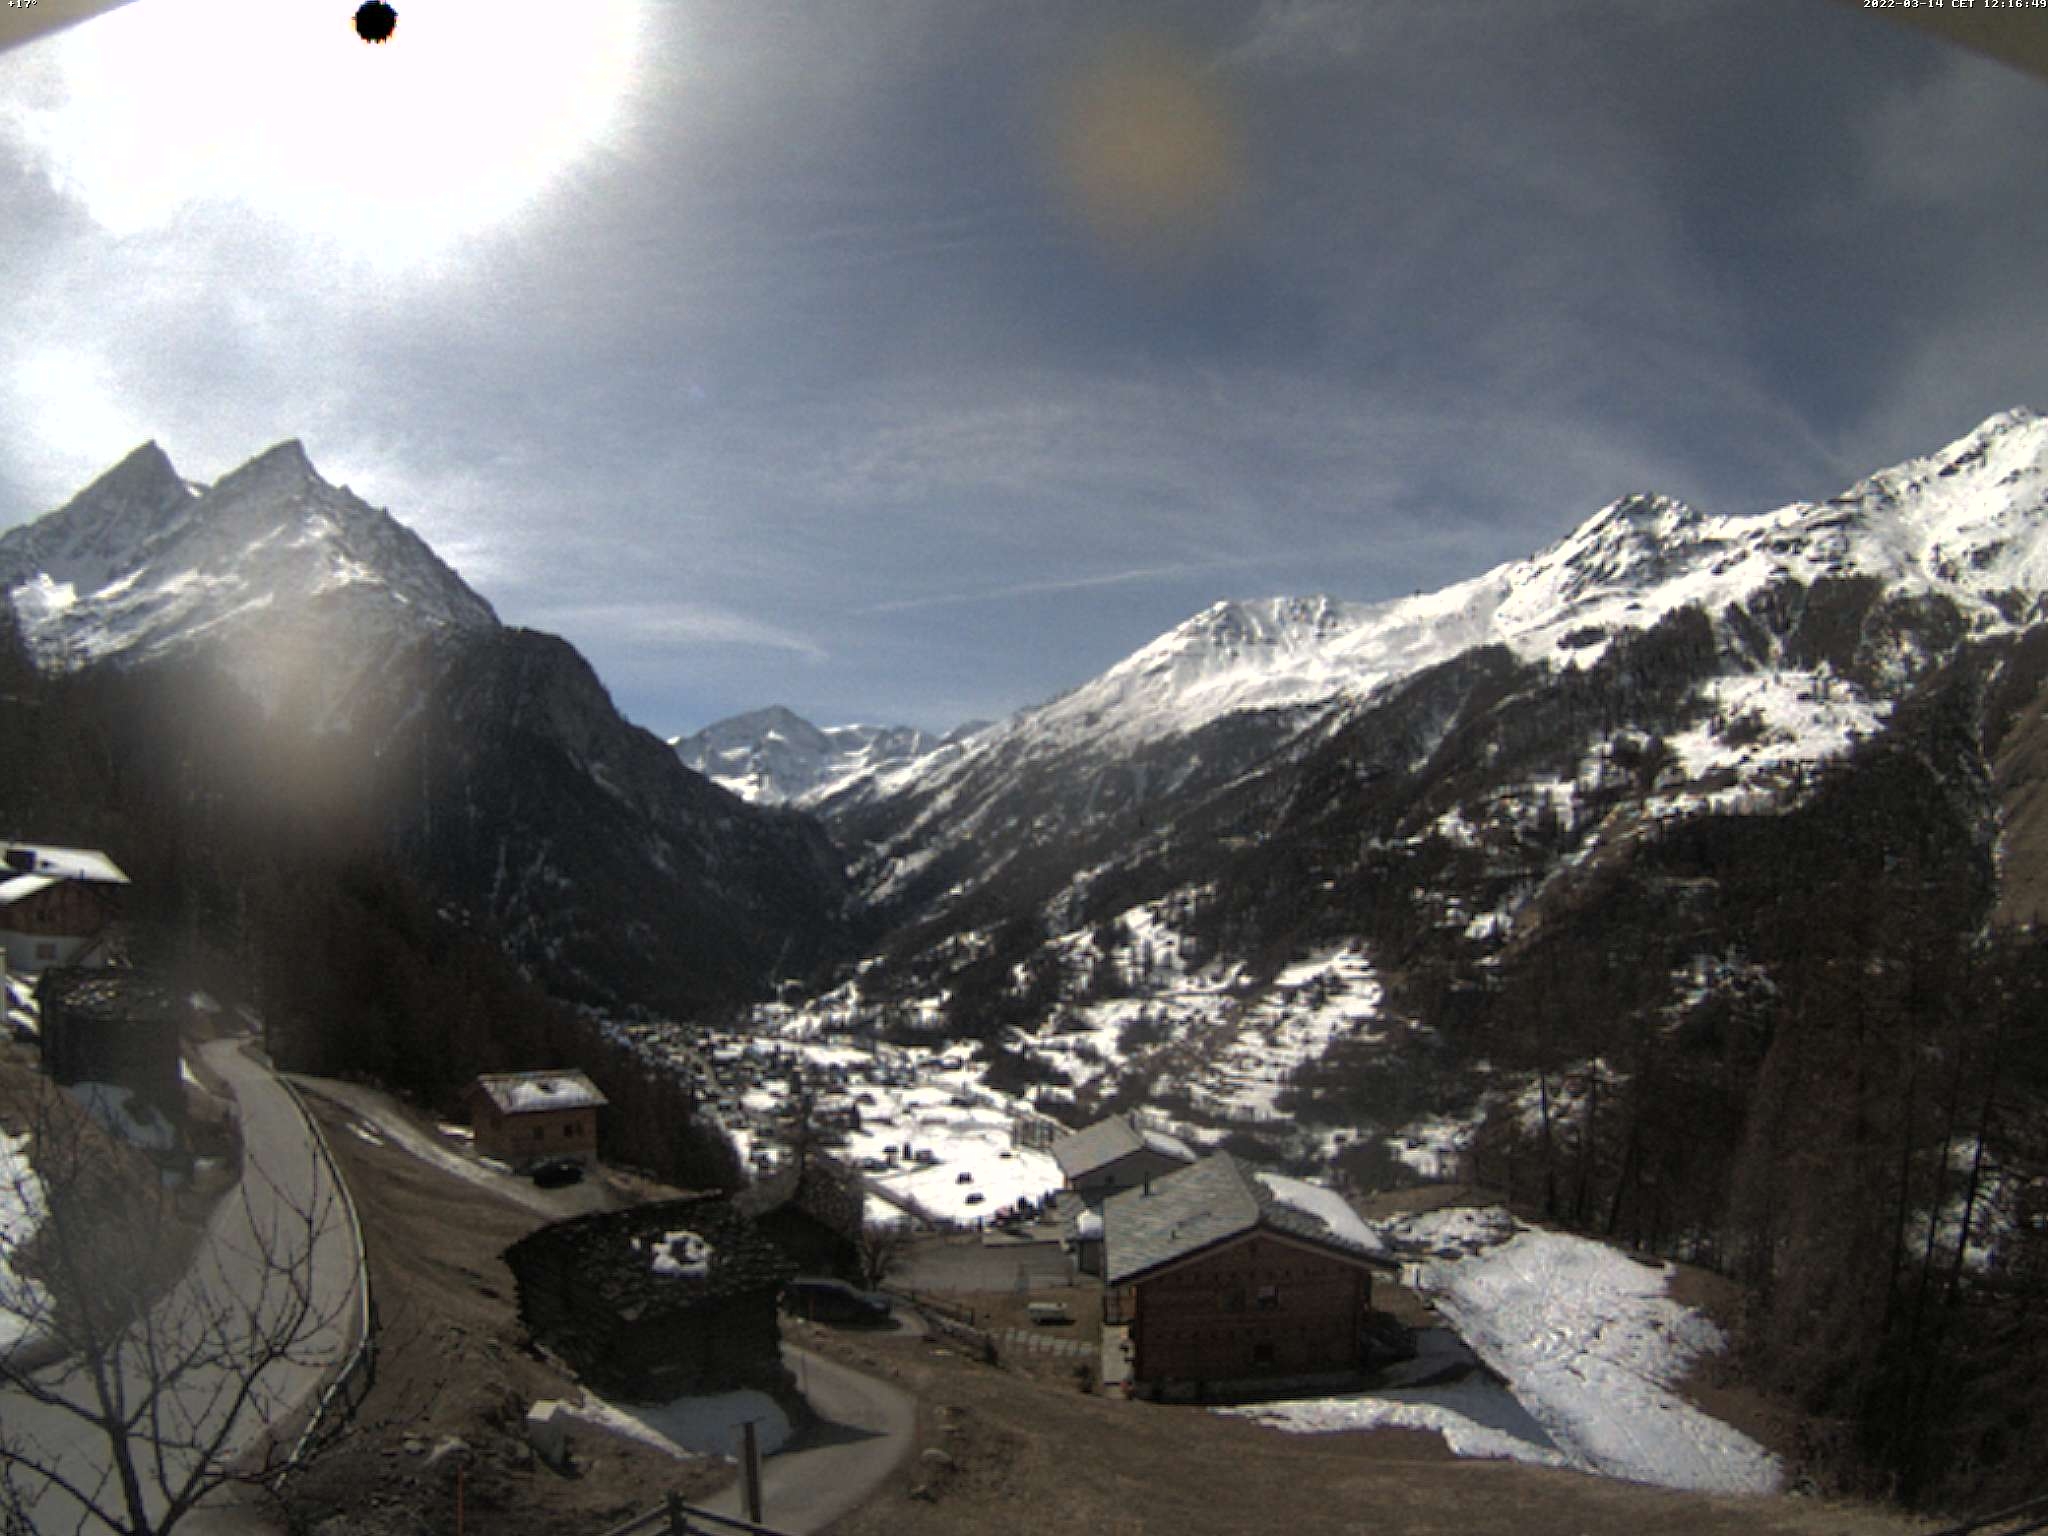 preview: IP camera - Sierre